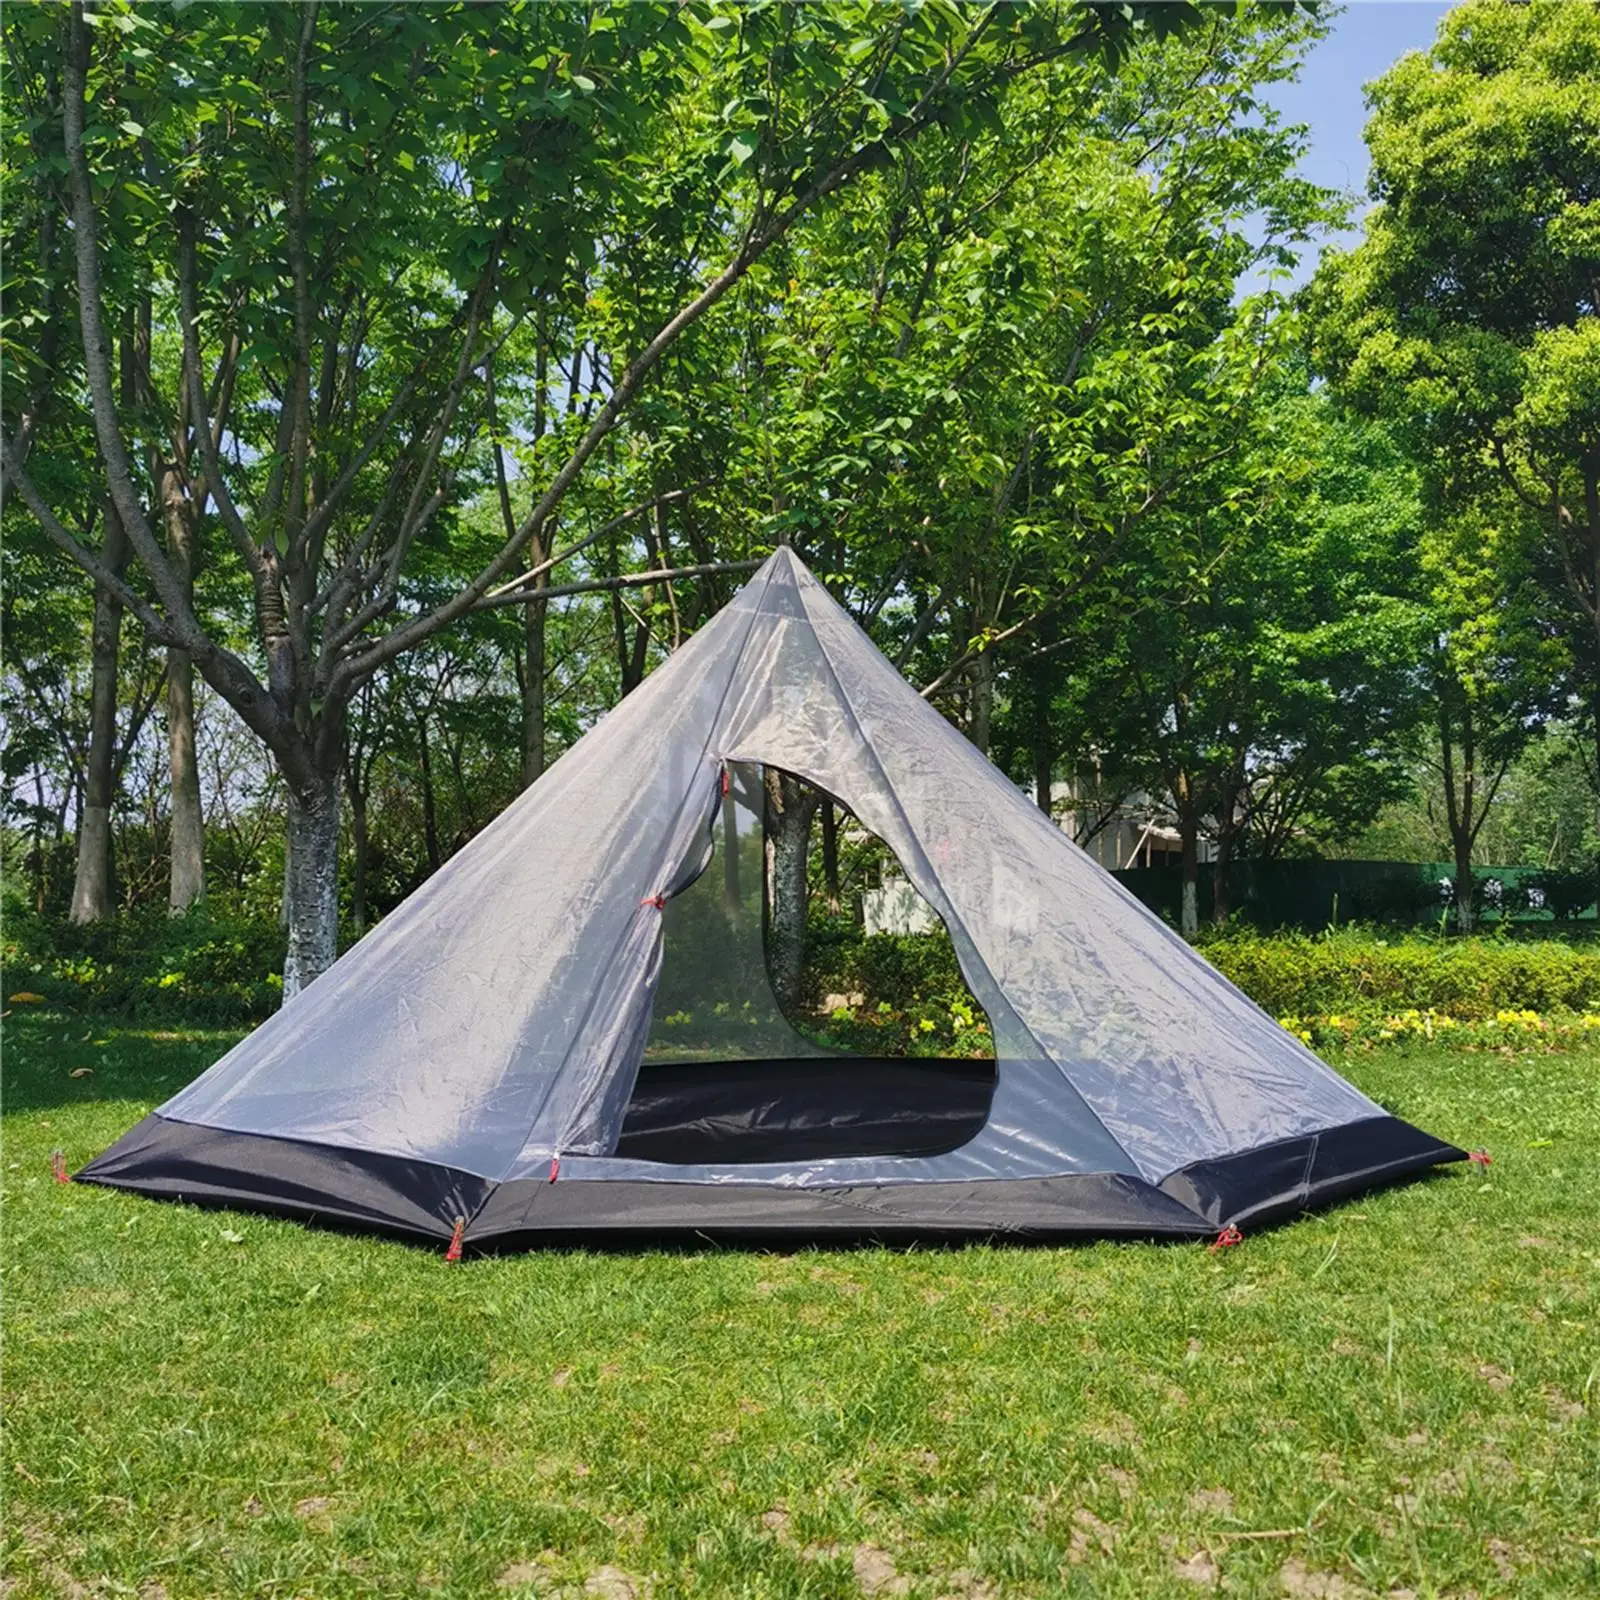 Camping   Tent Mesh Tent Shelter Waterproof Backpacking Hiking